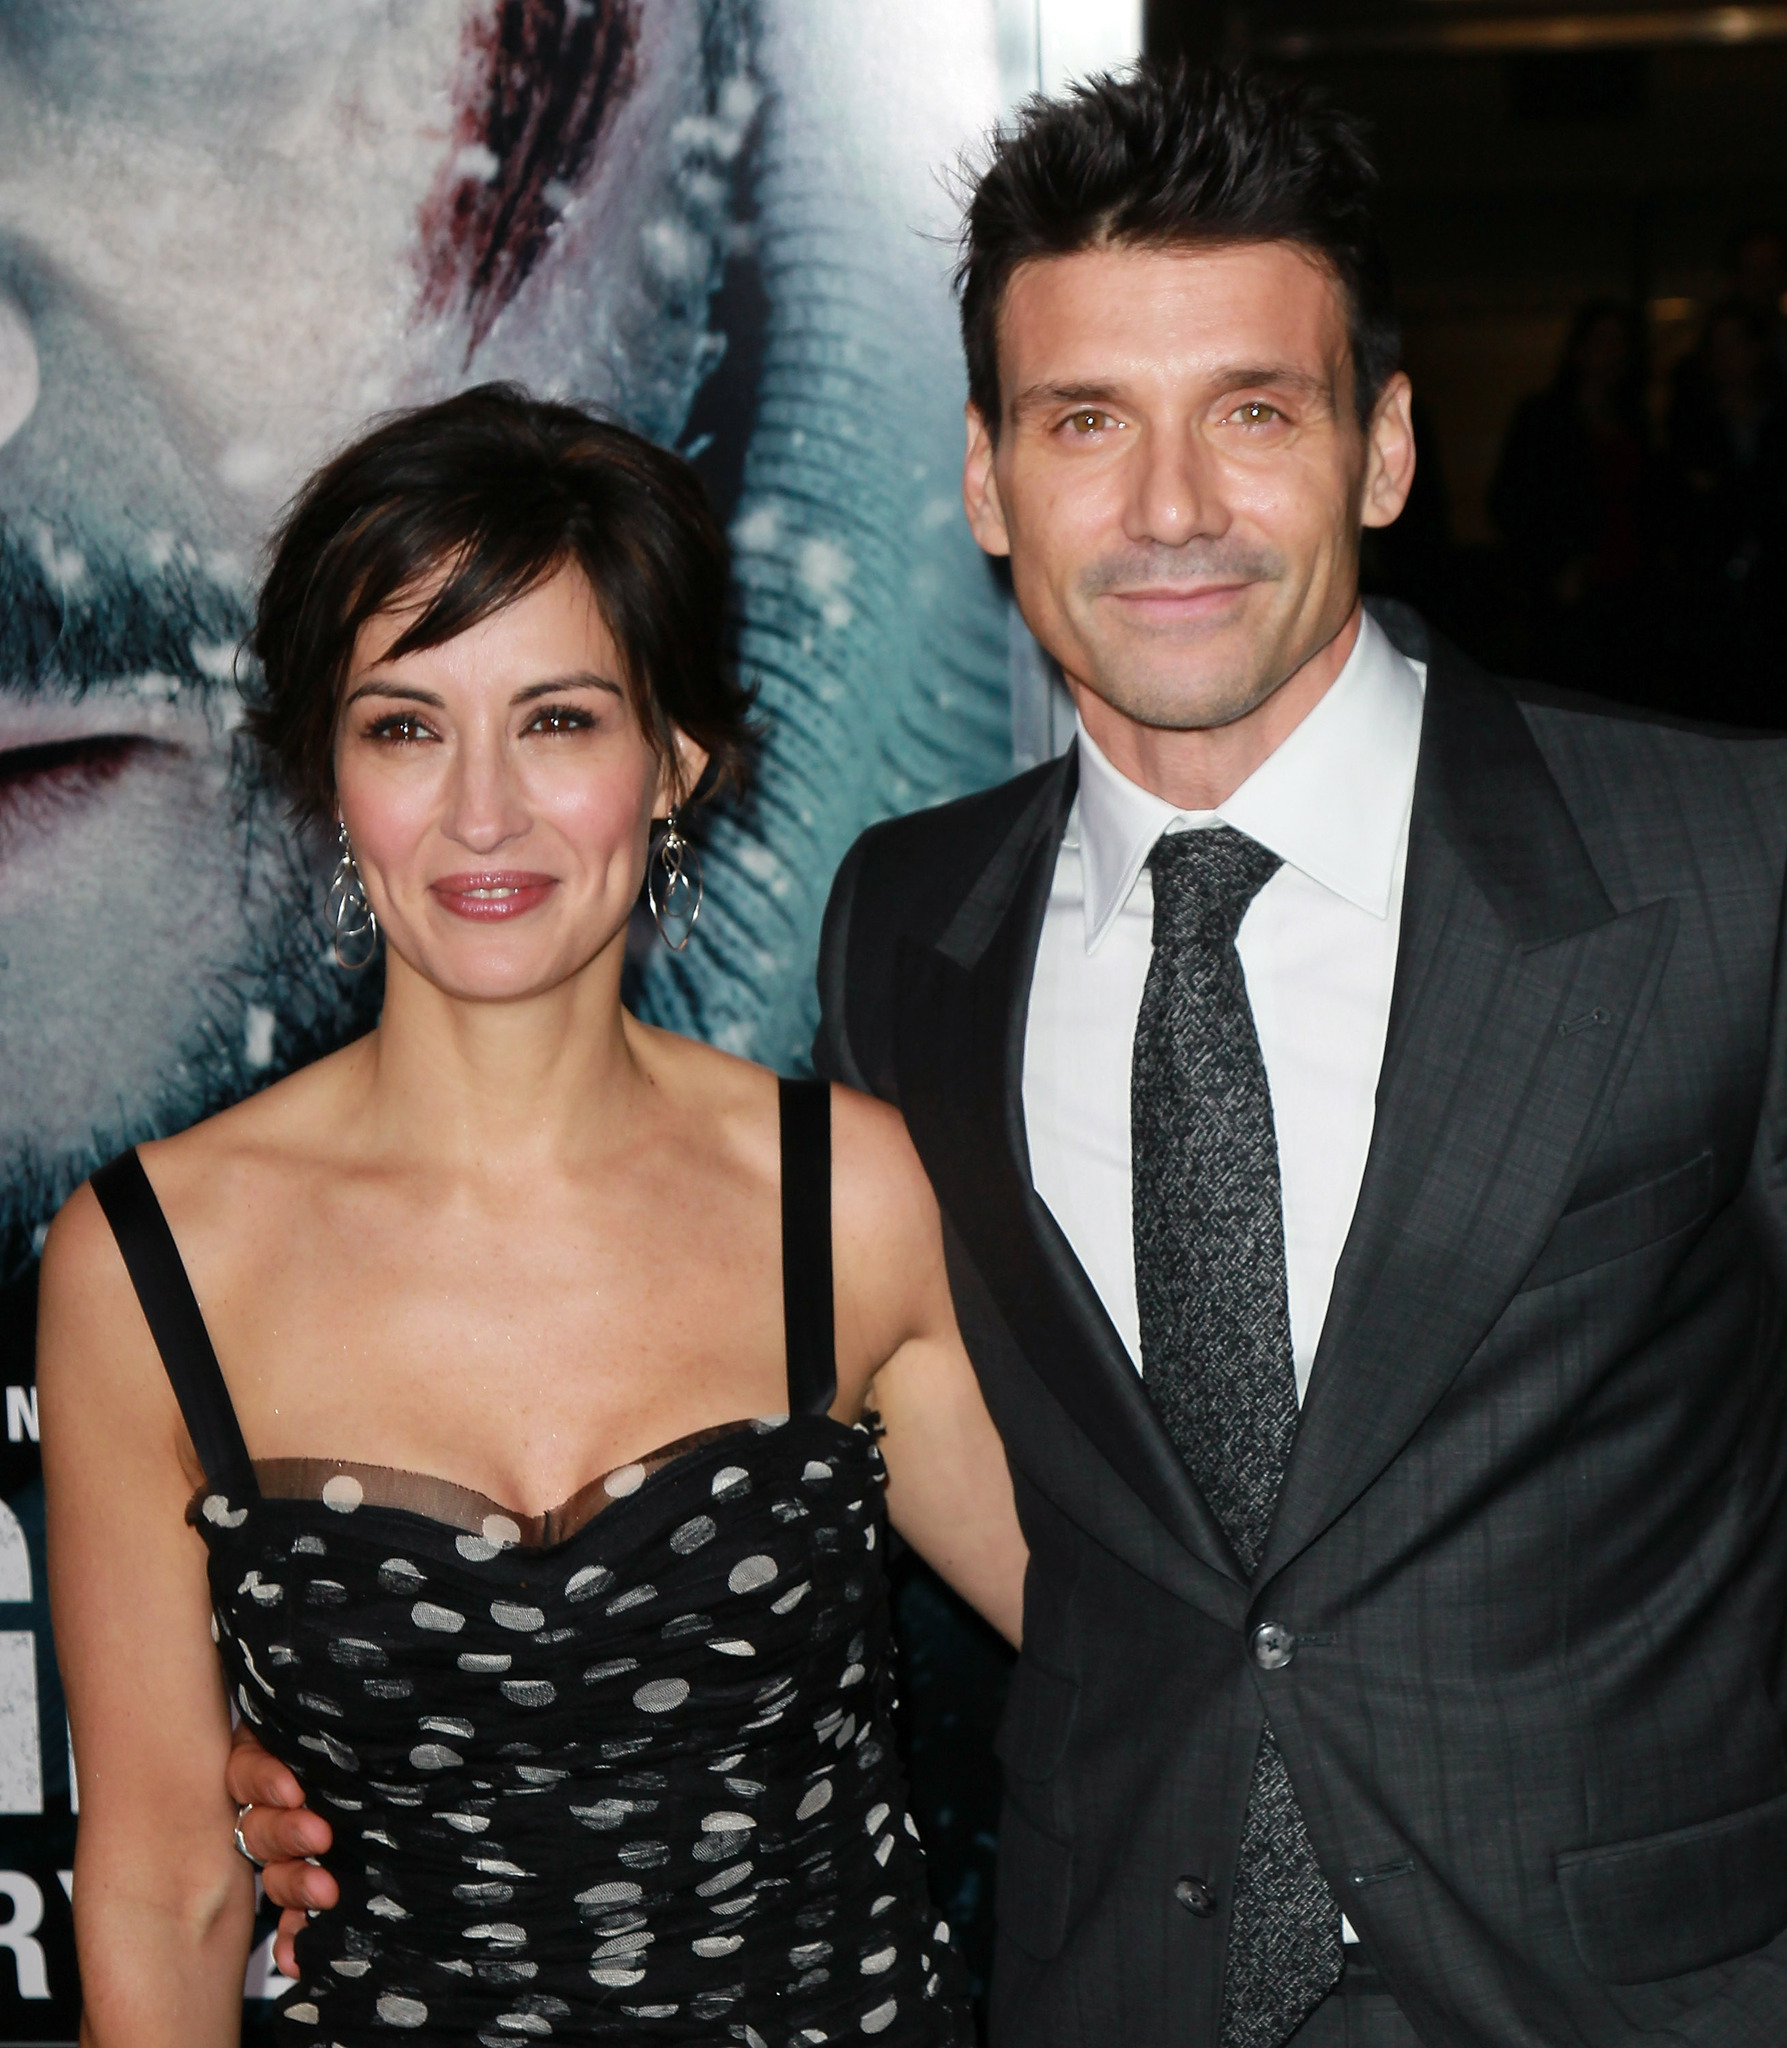 Frank Grillo and Wendy Moniz at event of Sniegynu ikaitai (2011)